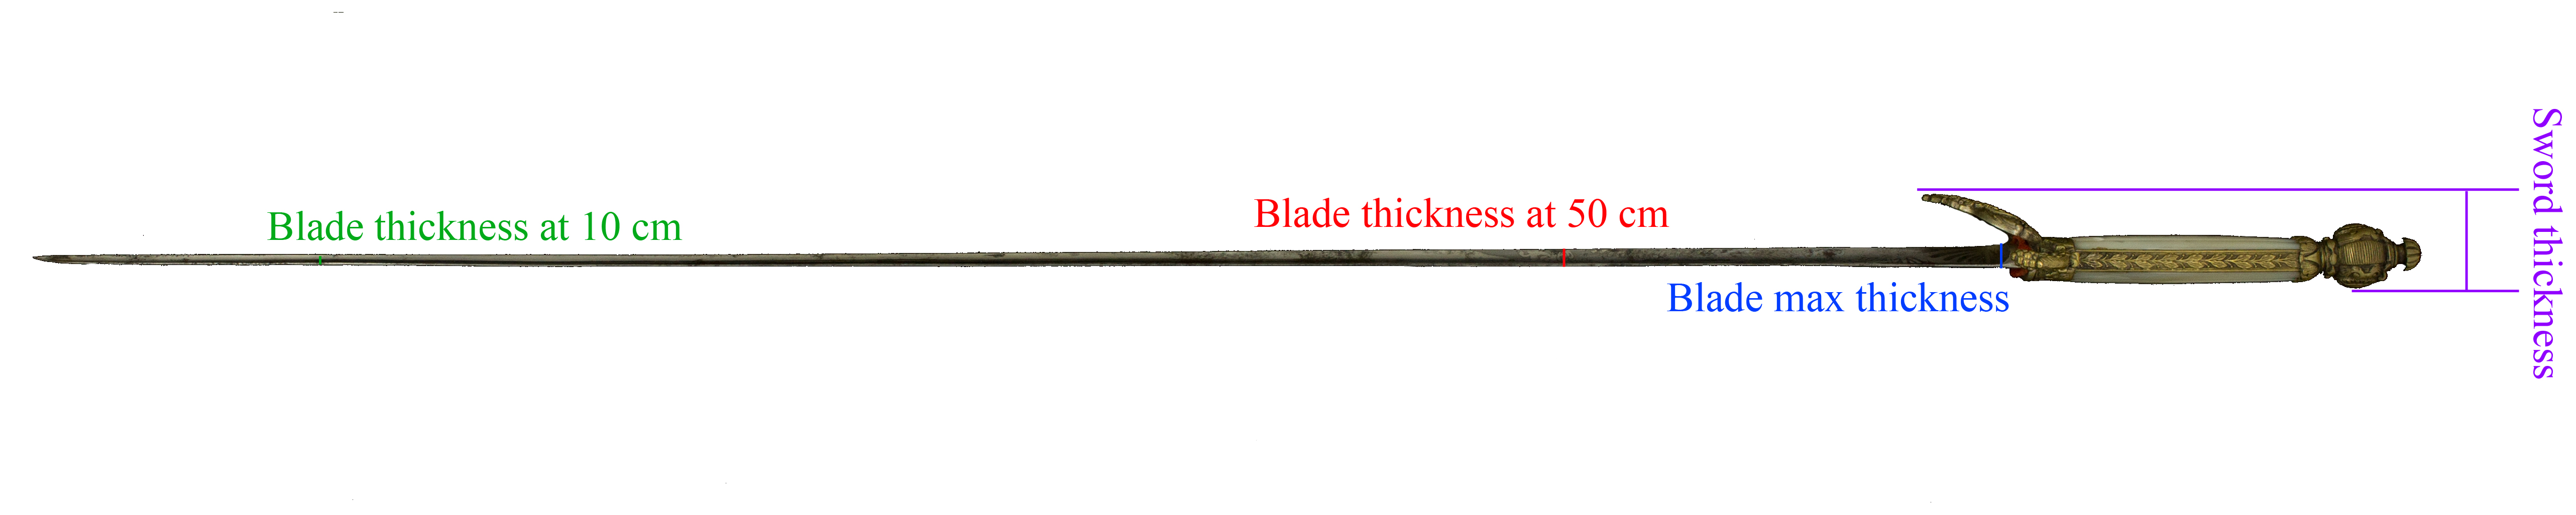 Sword Thickness